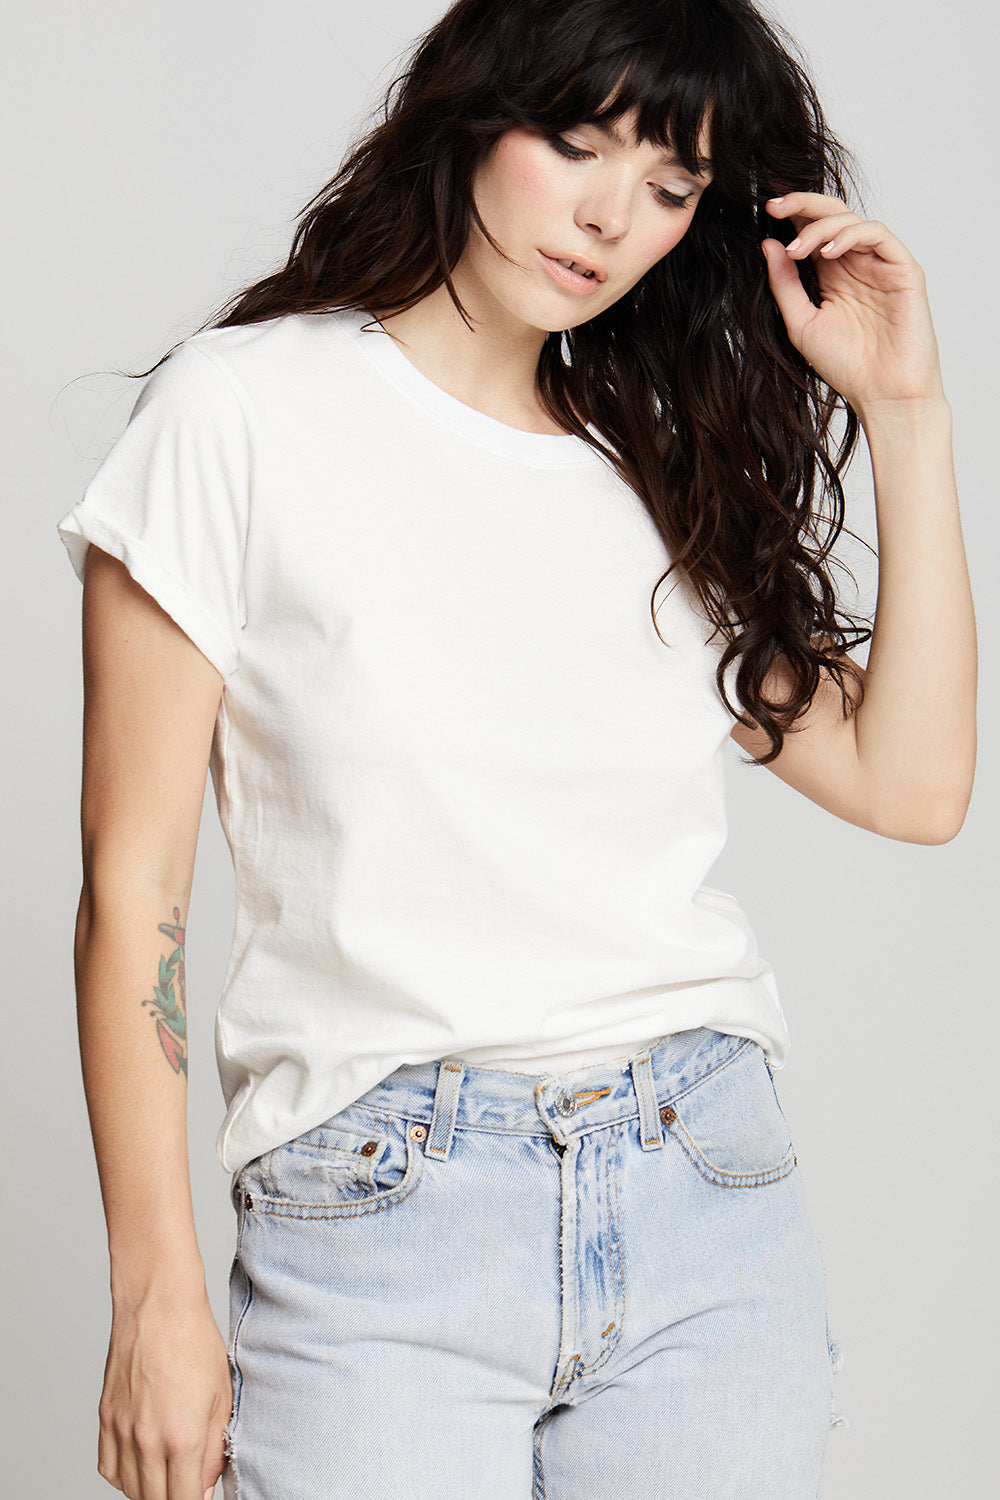 White Fitted Tee